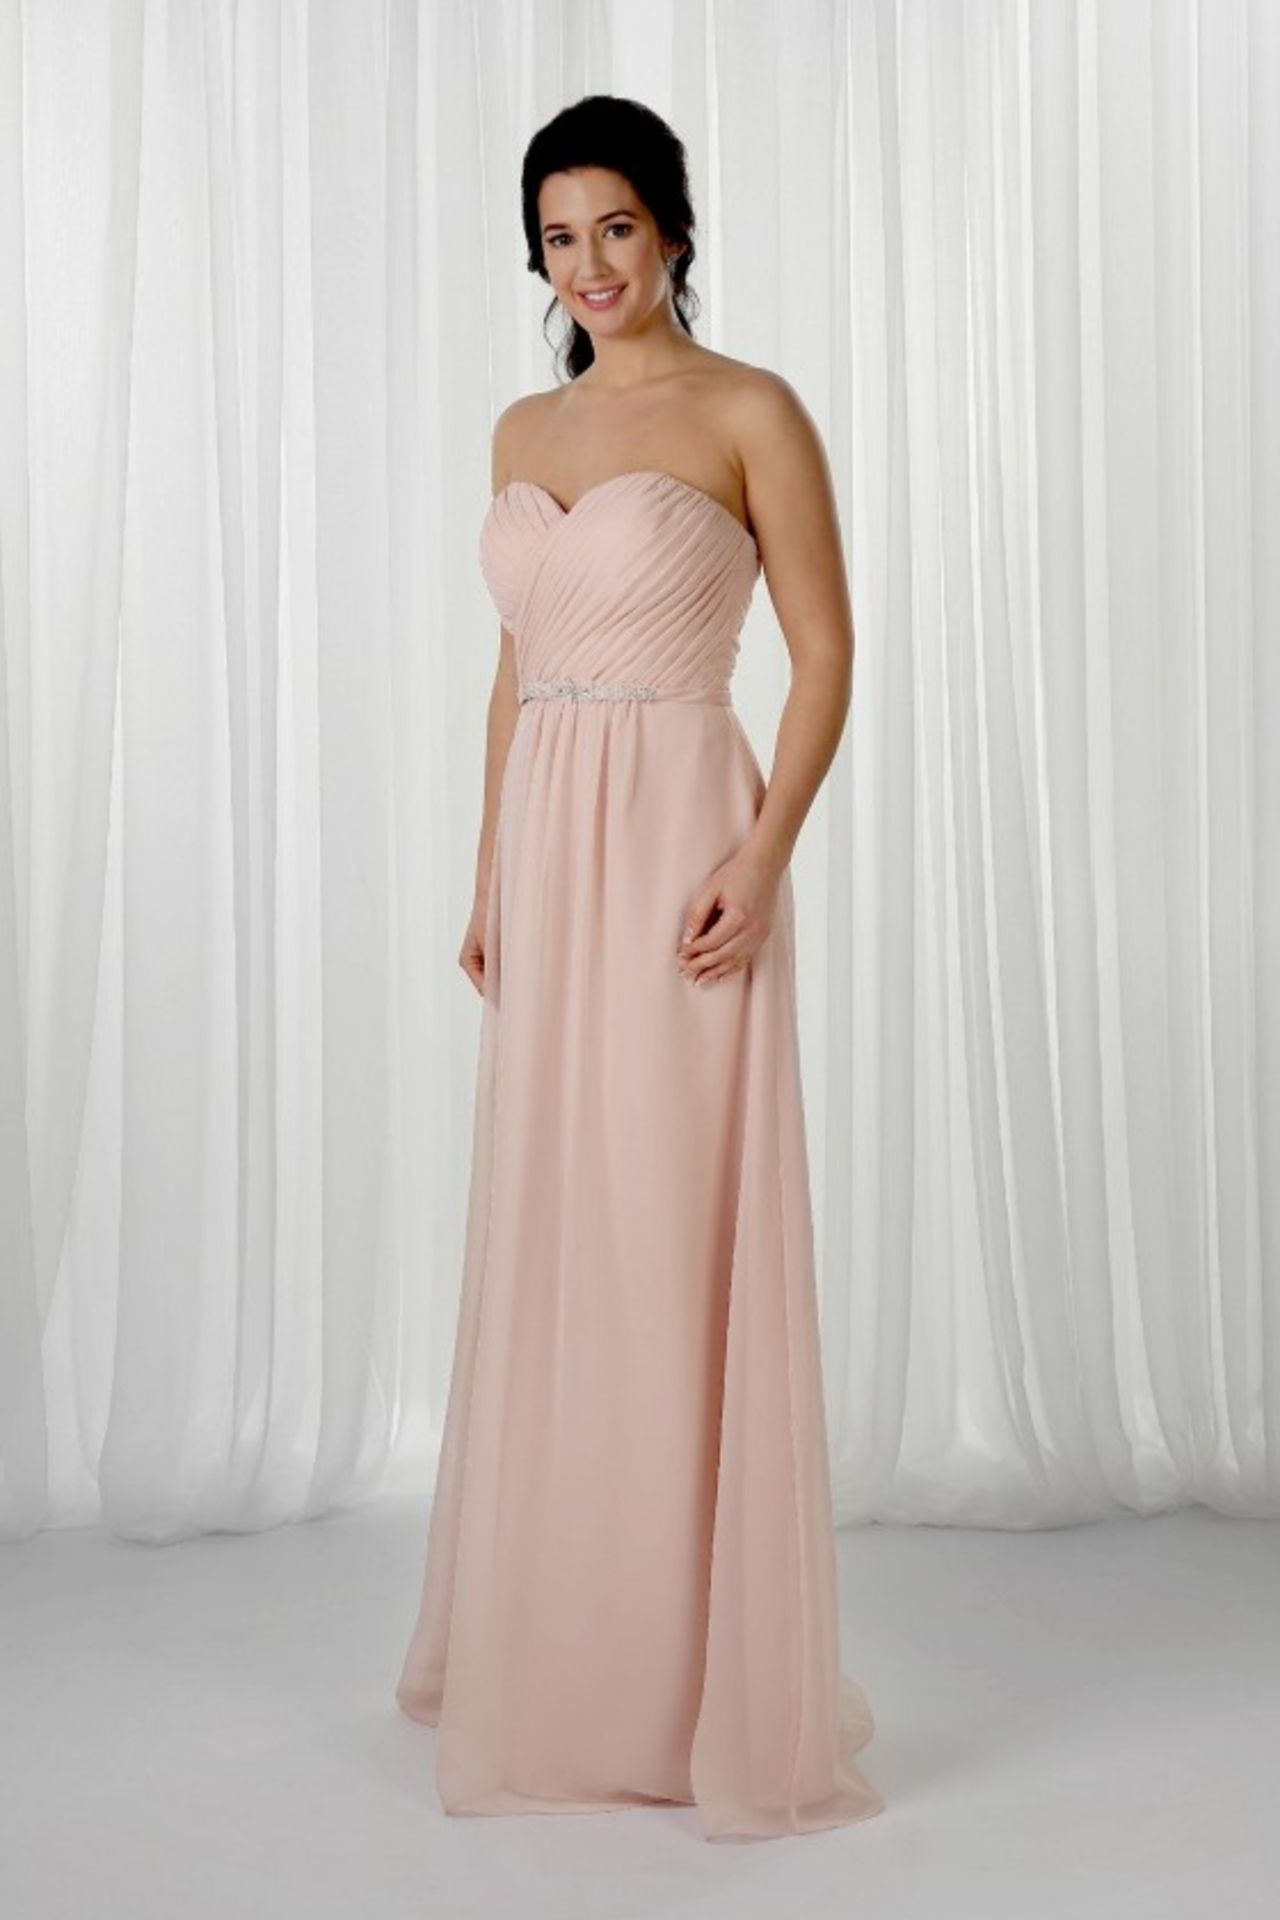 Bridesmaid Or Prom Dresses From Richard Designs Mixed Sizes and Colours. 10 Dresses - Image 8 of 9